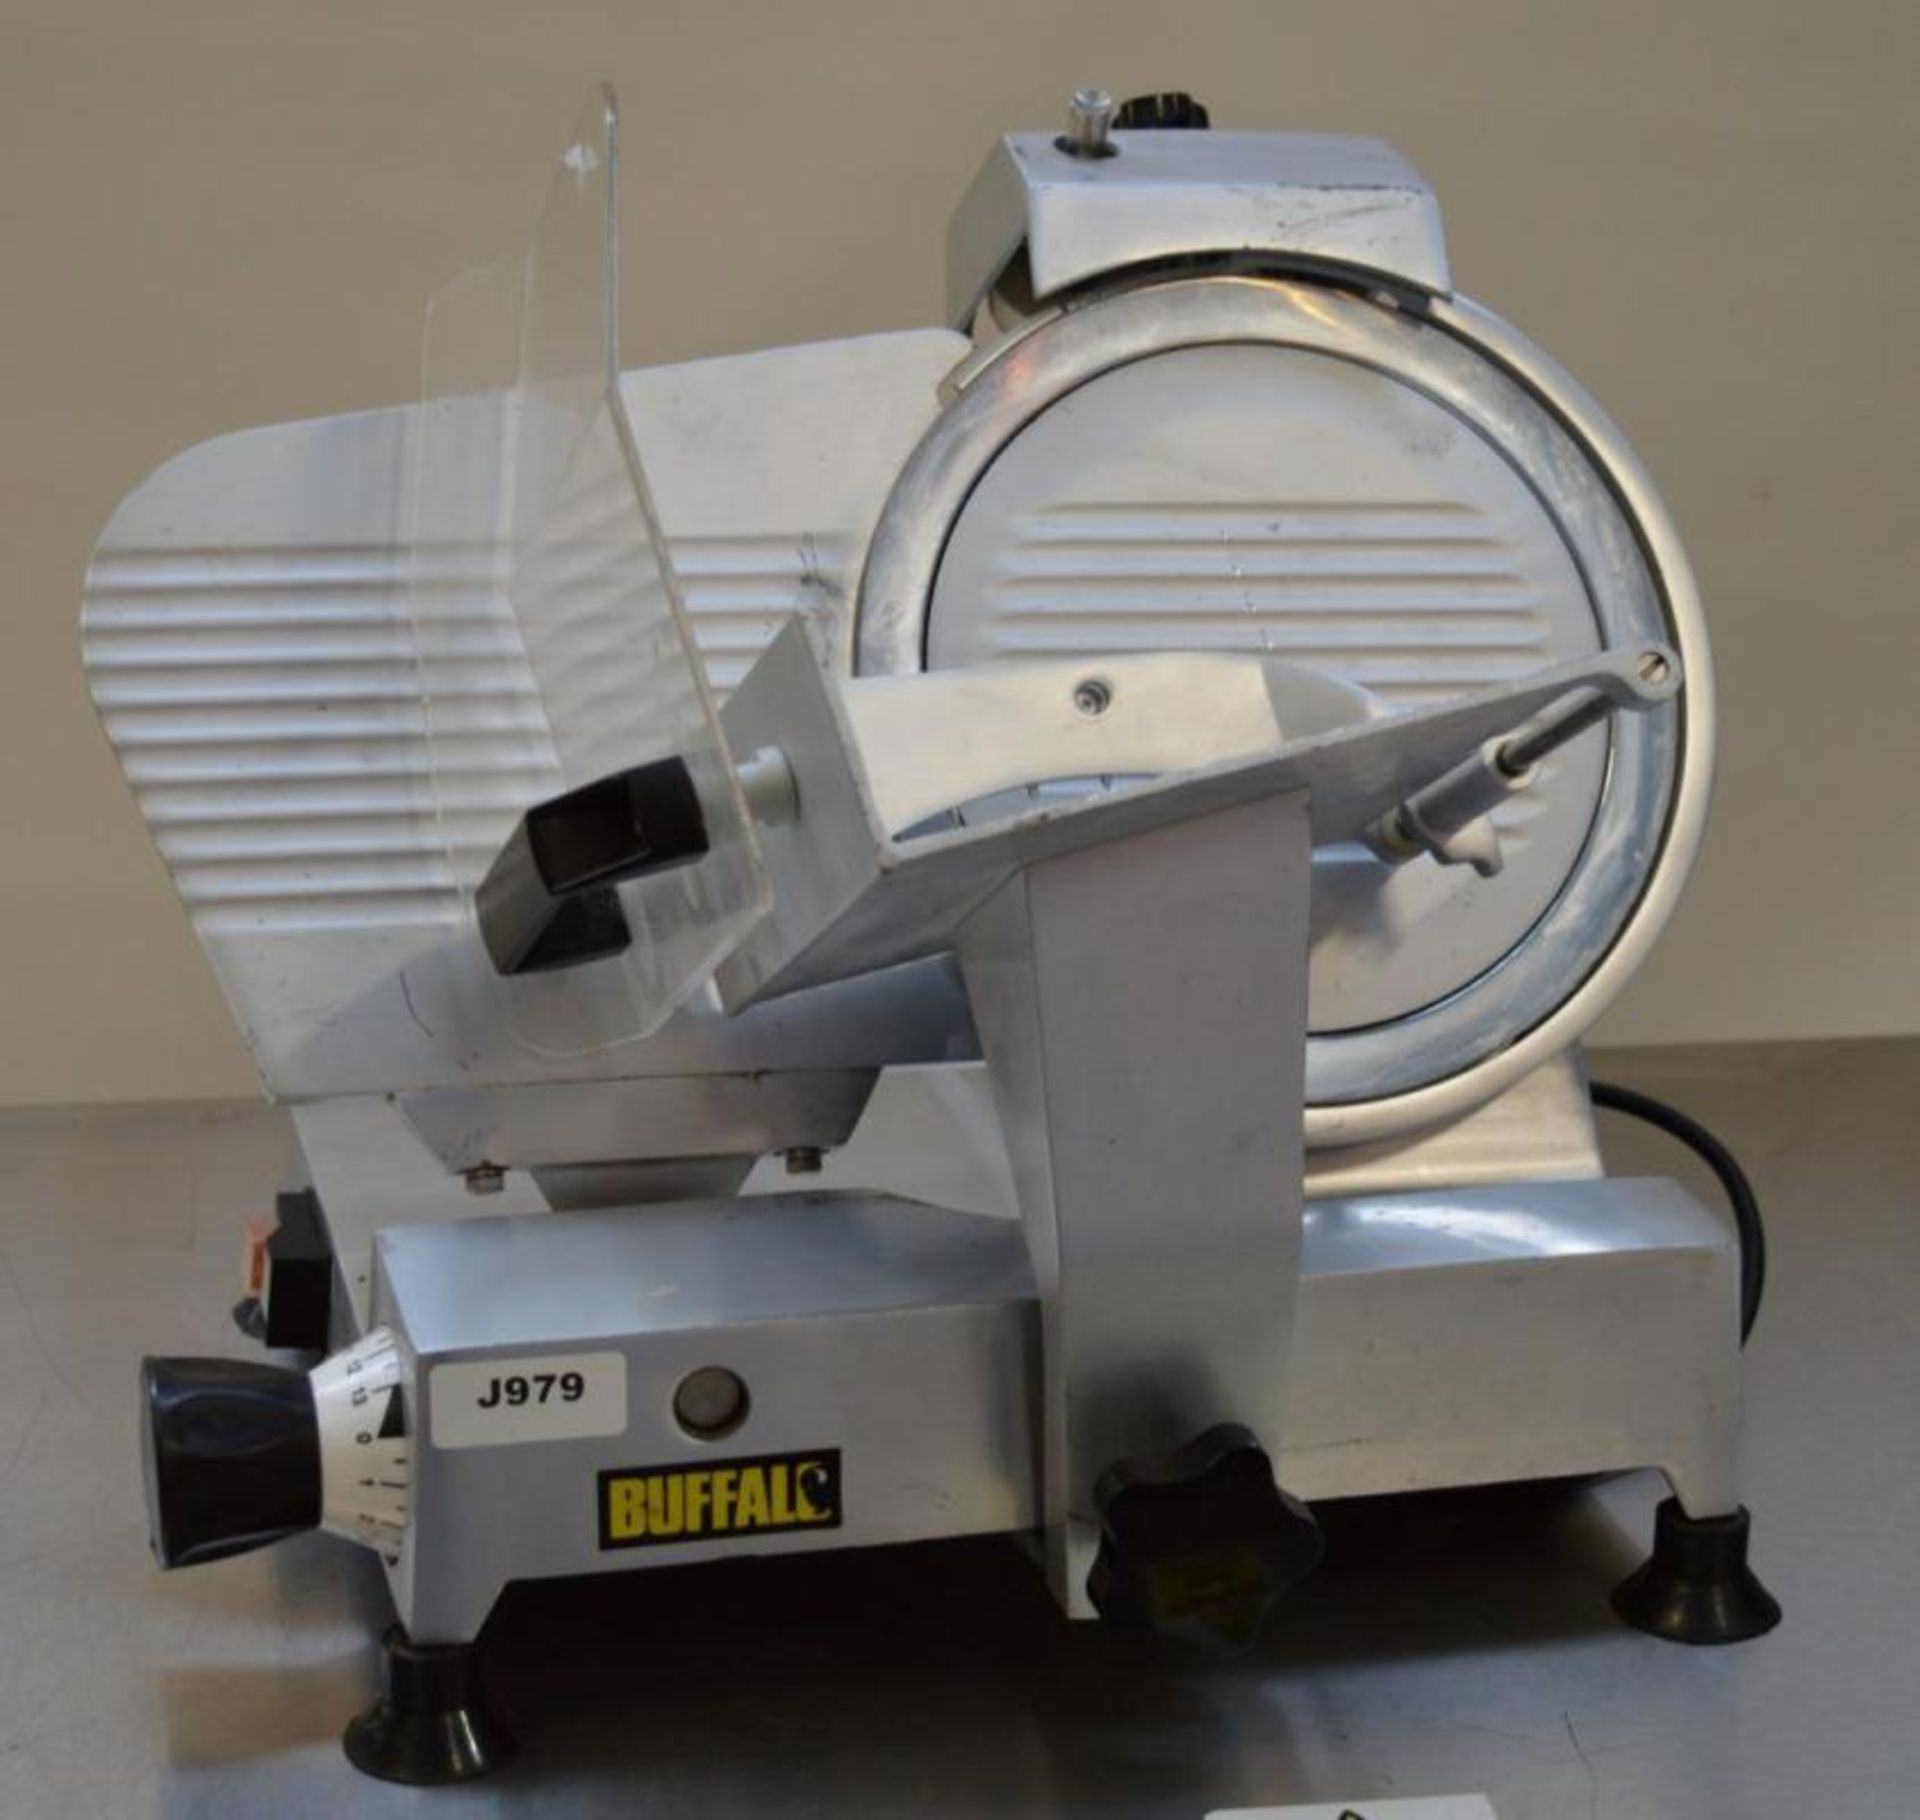 1 x Buffalo CD278 Stainless Steel Commercial 10 Inch Meat Slicer - 240V 120W - H40 x W47 x D40 cms - - Image 2 of 10